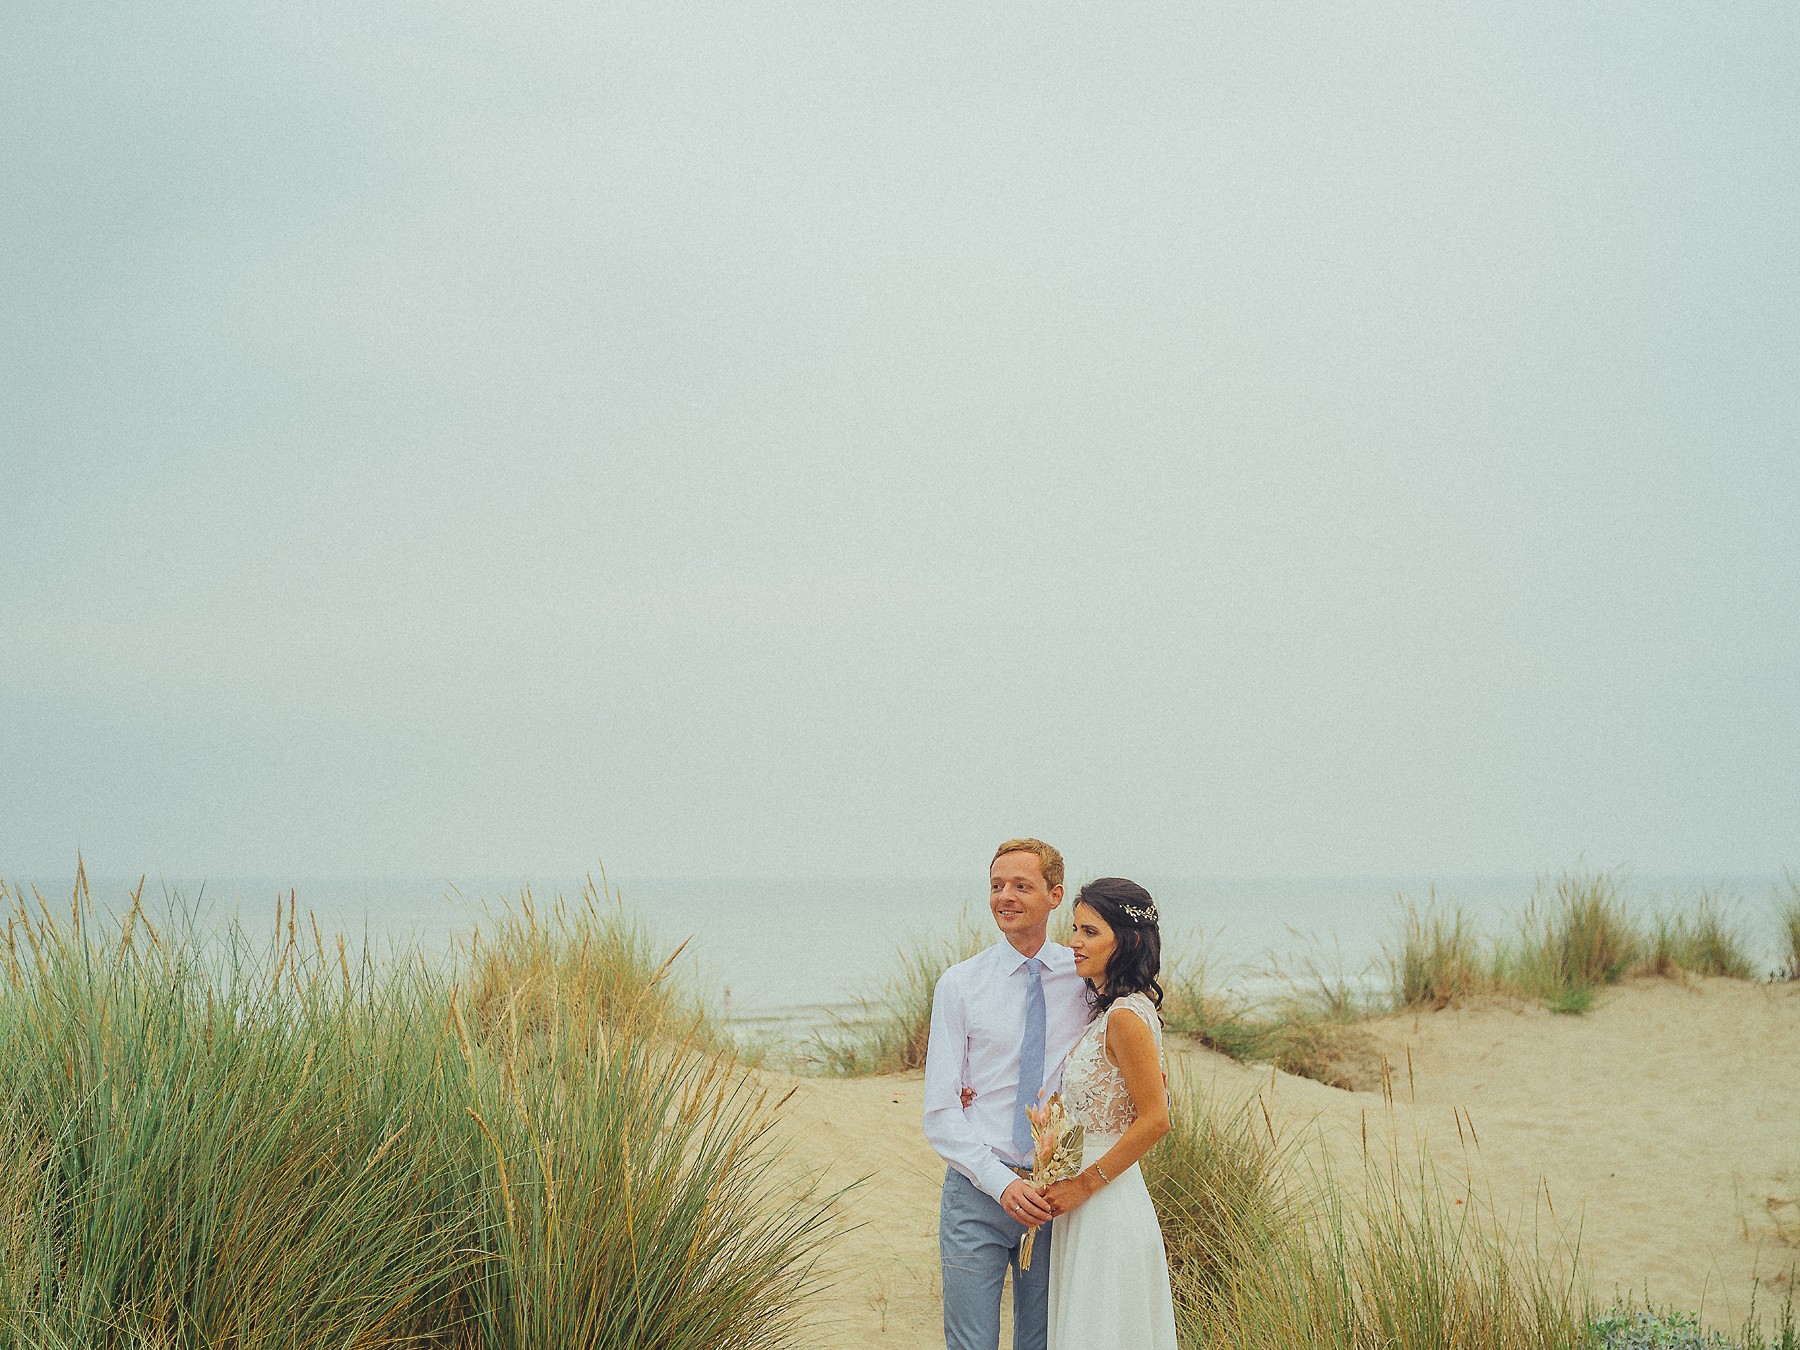 storytelling wedding photography in the beach